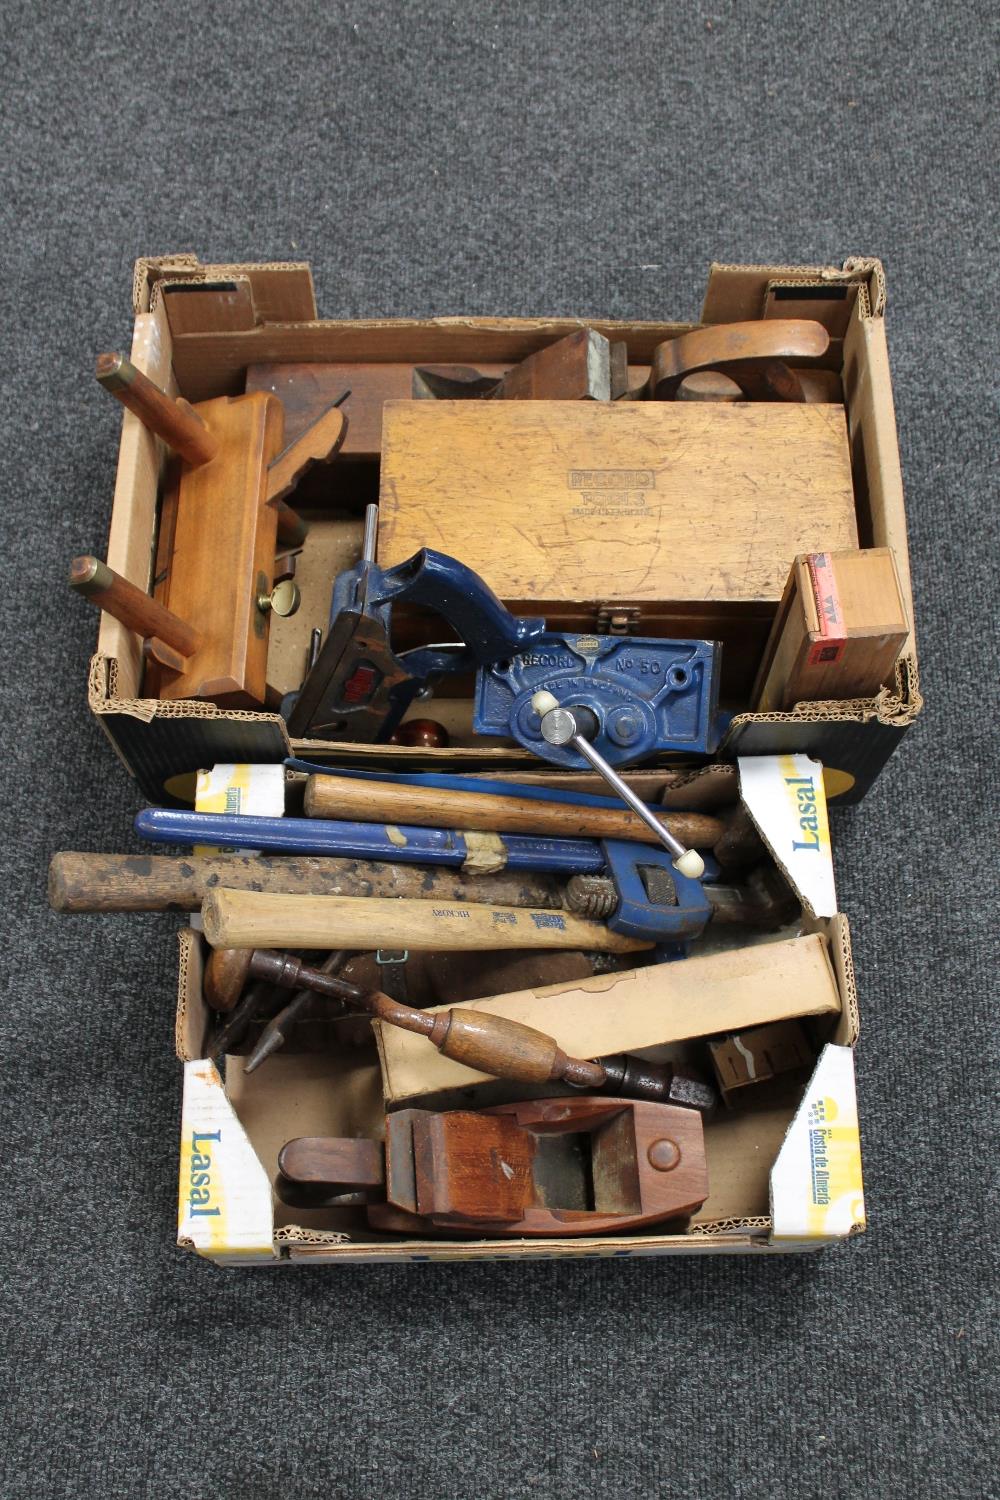 Two boxes of hand tools, wood working planes, record tools plane in wooden box,